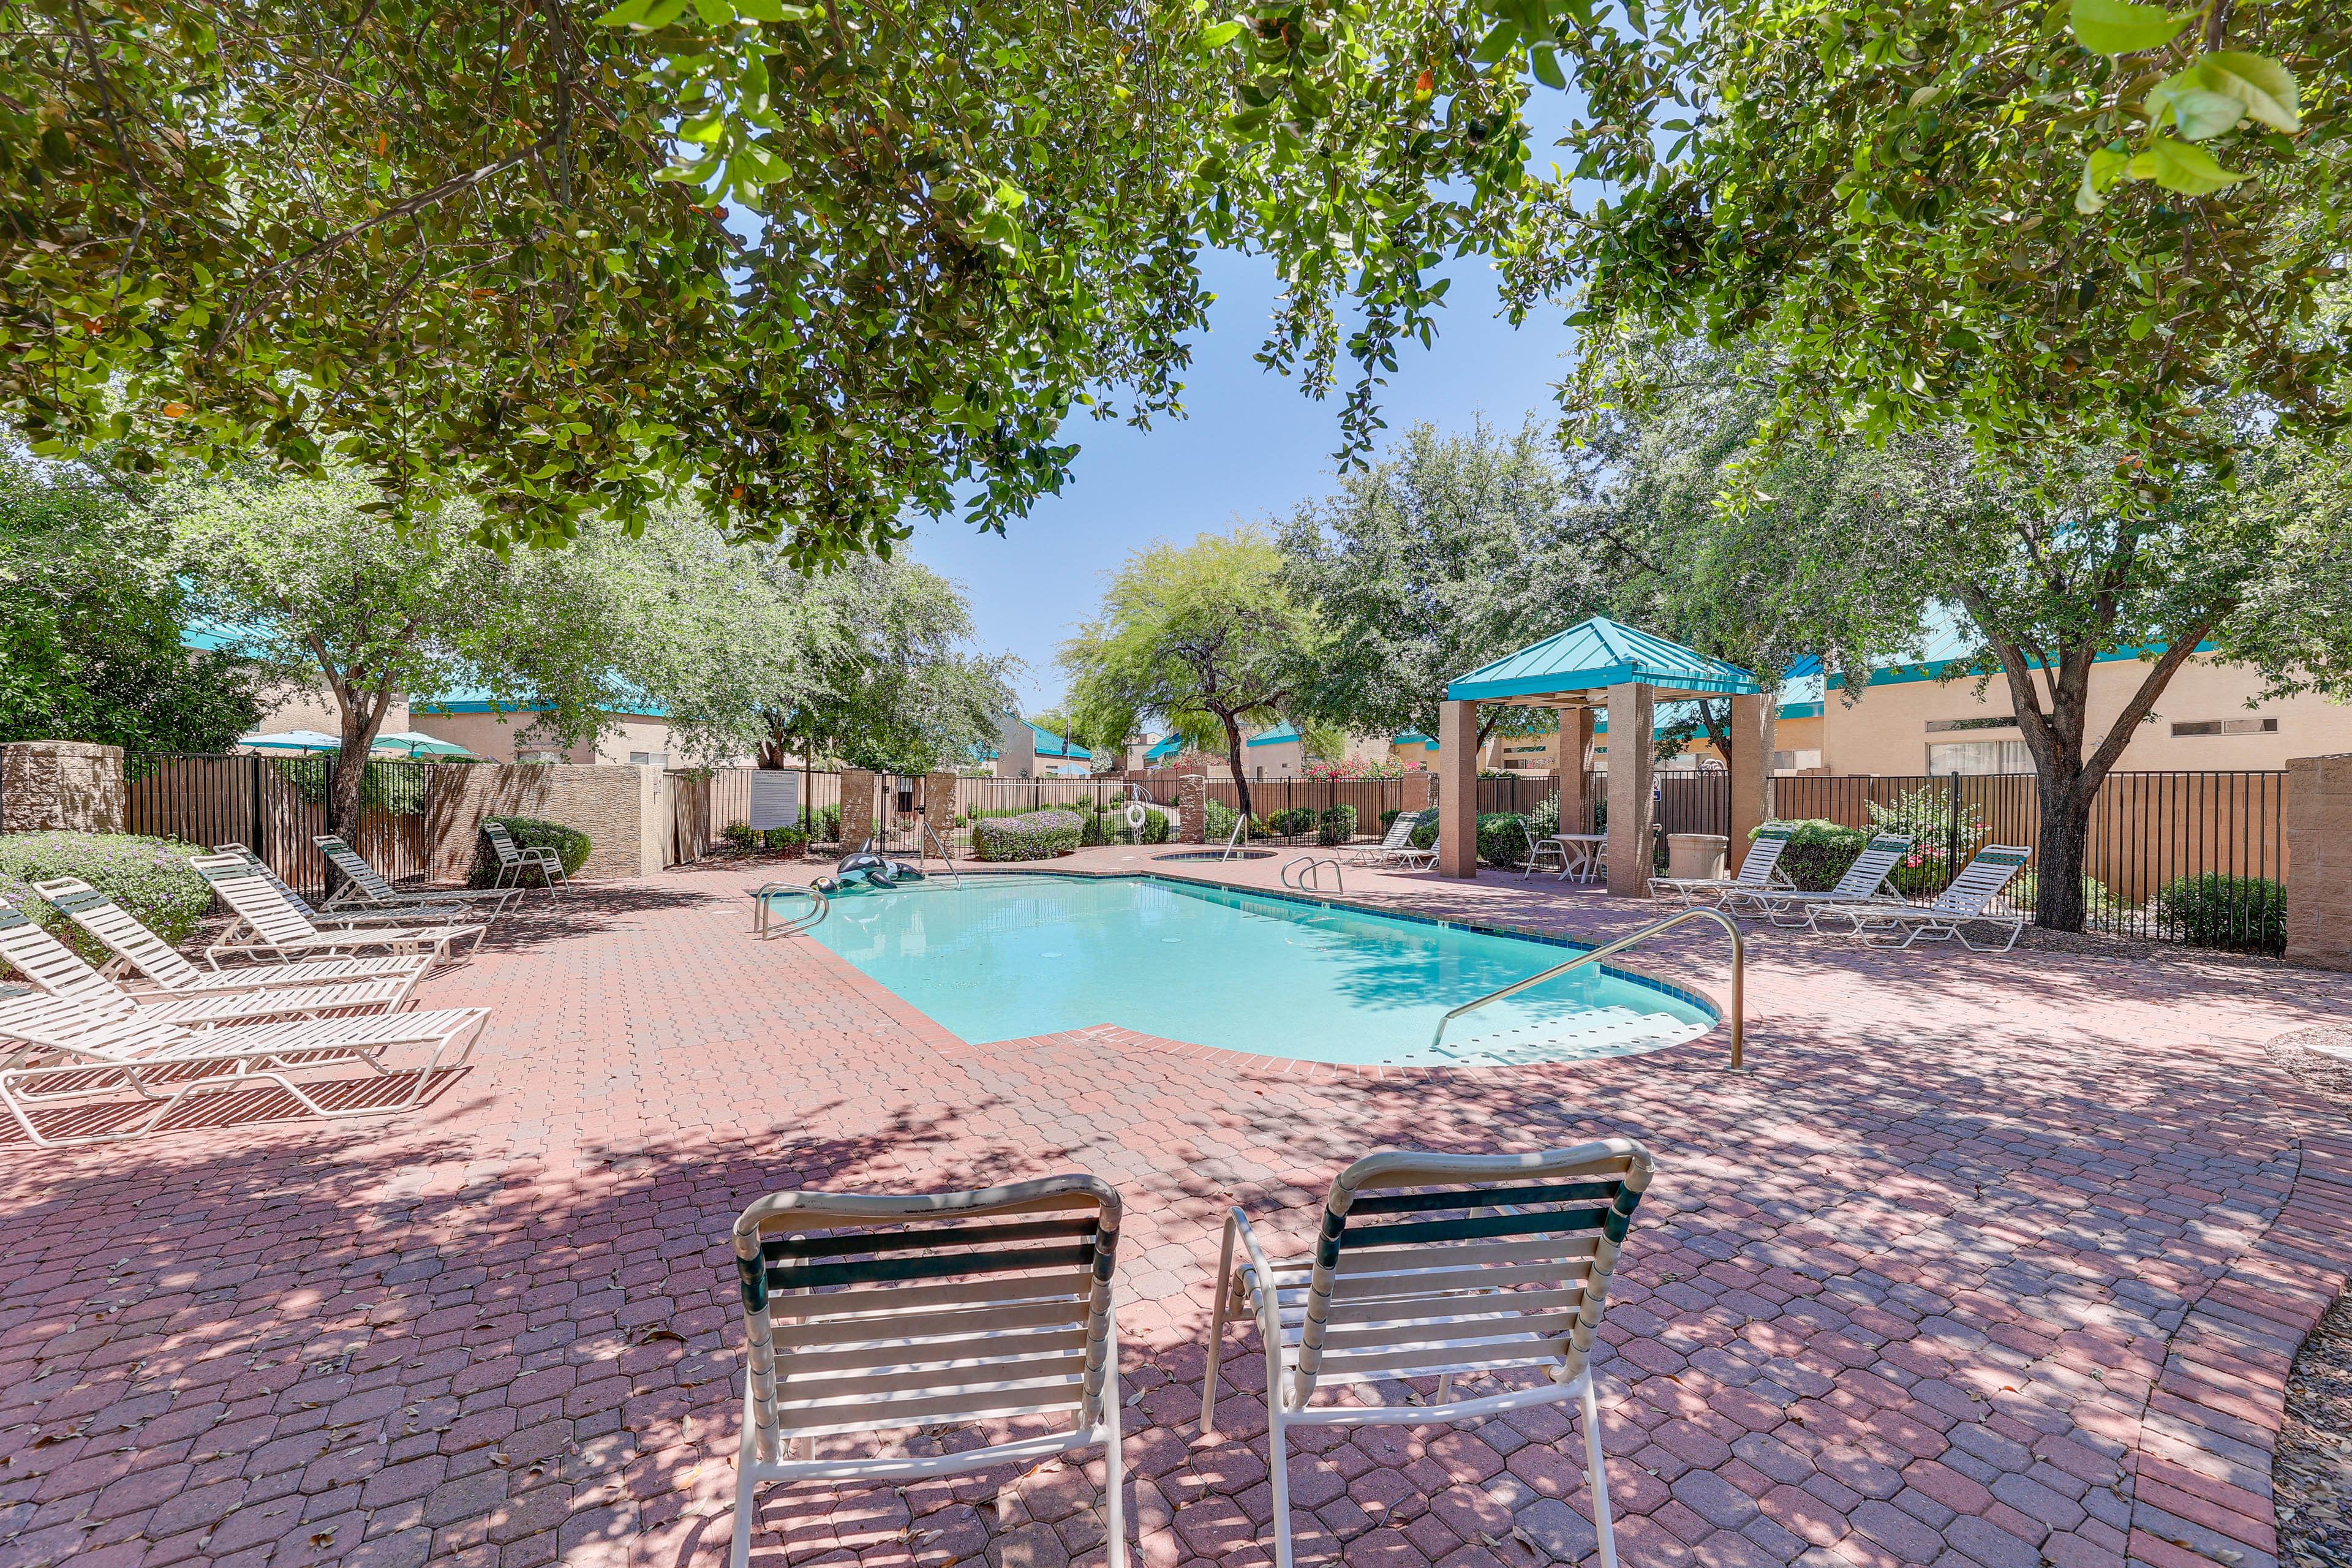 Mesa Vacation Rental | 3BR | 3BA | 1,550 Sq Ft | 1 Step Required to Enter